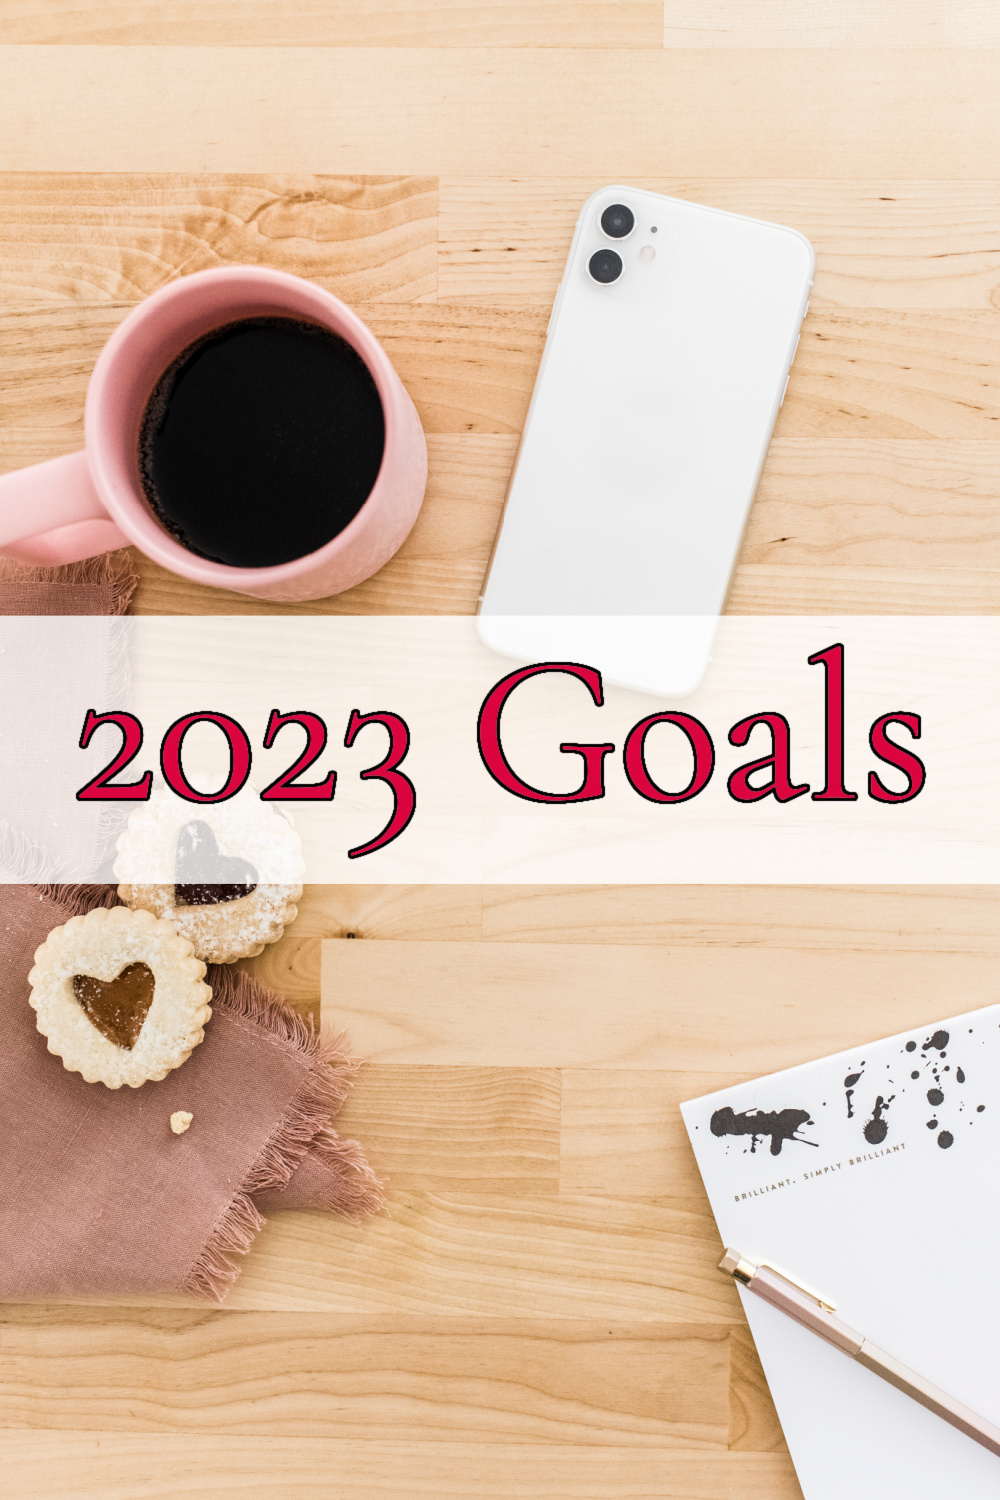 2023 Goals – How to Create & Implement